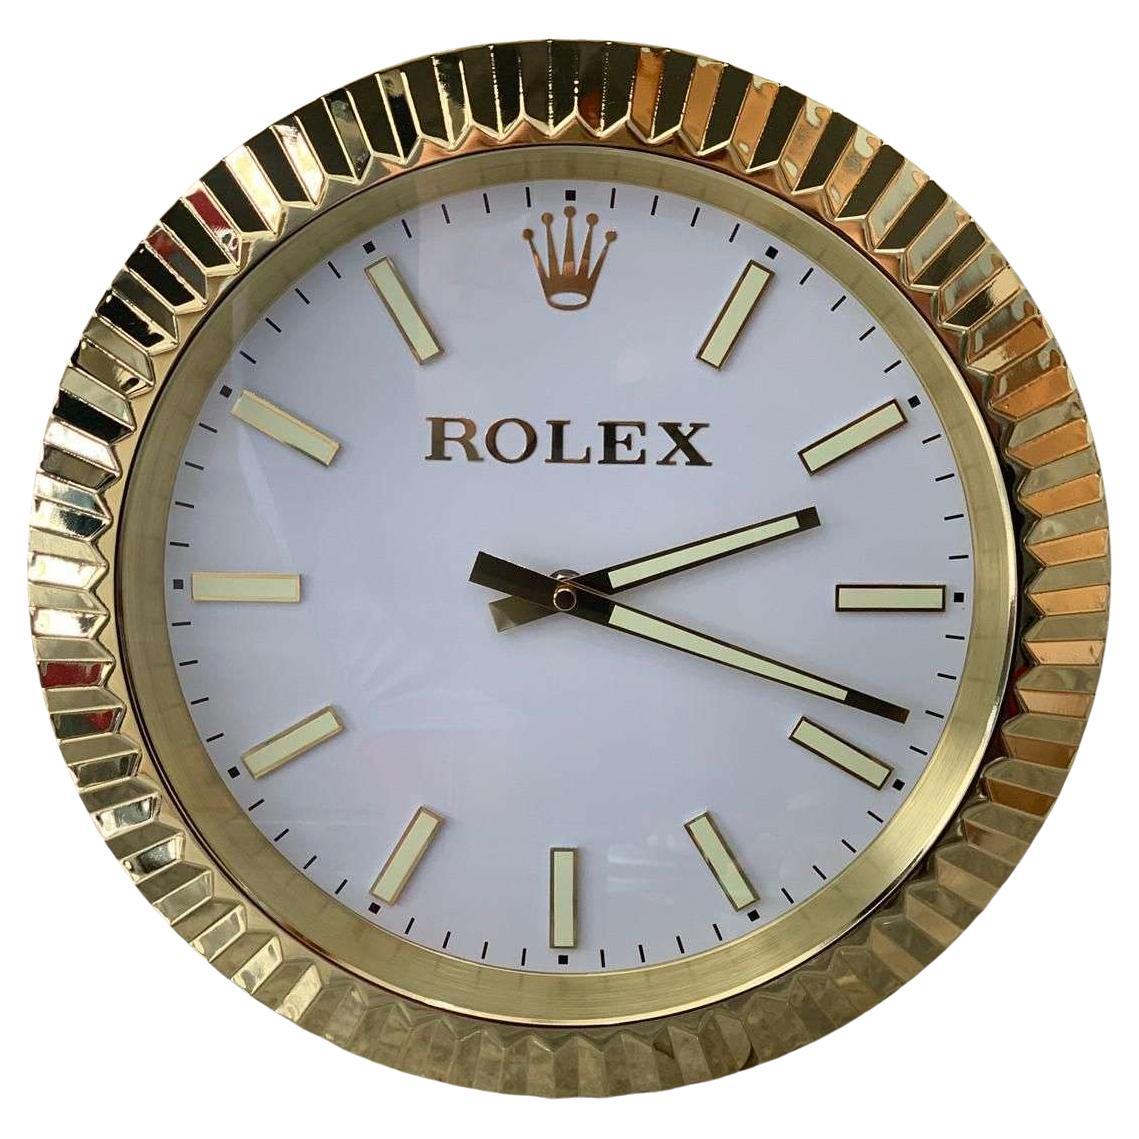 ROLEX Officially Certified Datejust Gold Wall Clock at 1stDibs